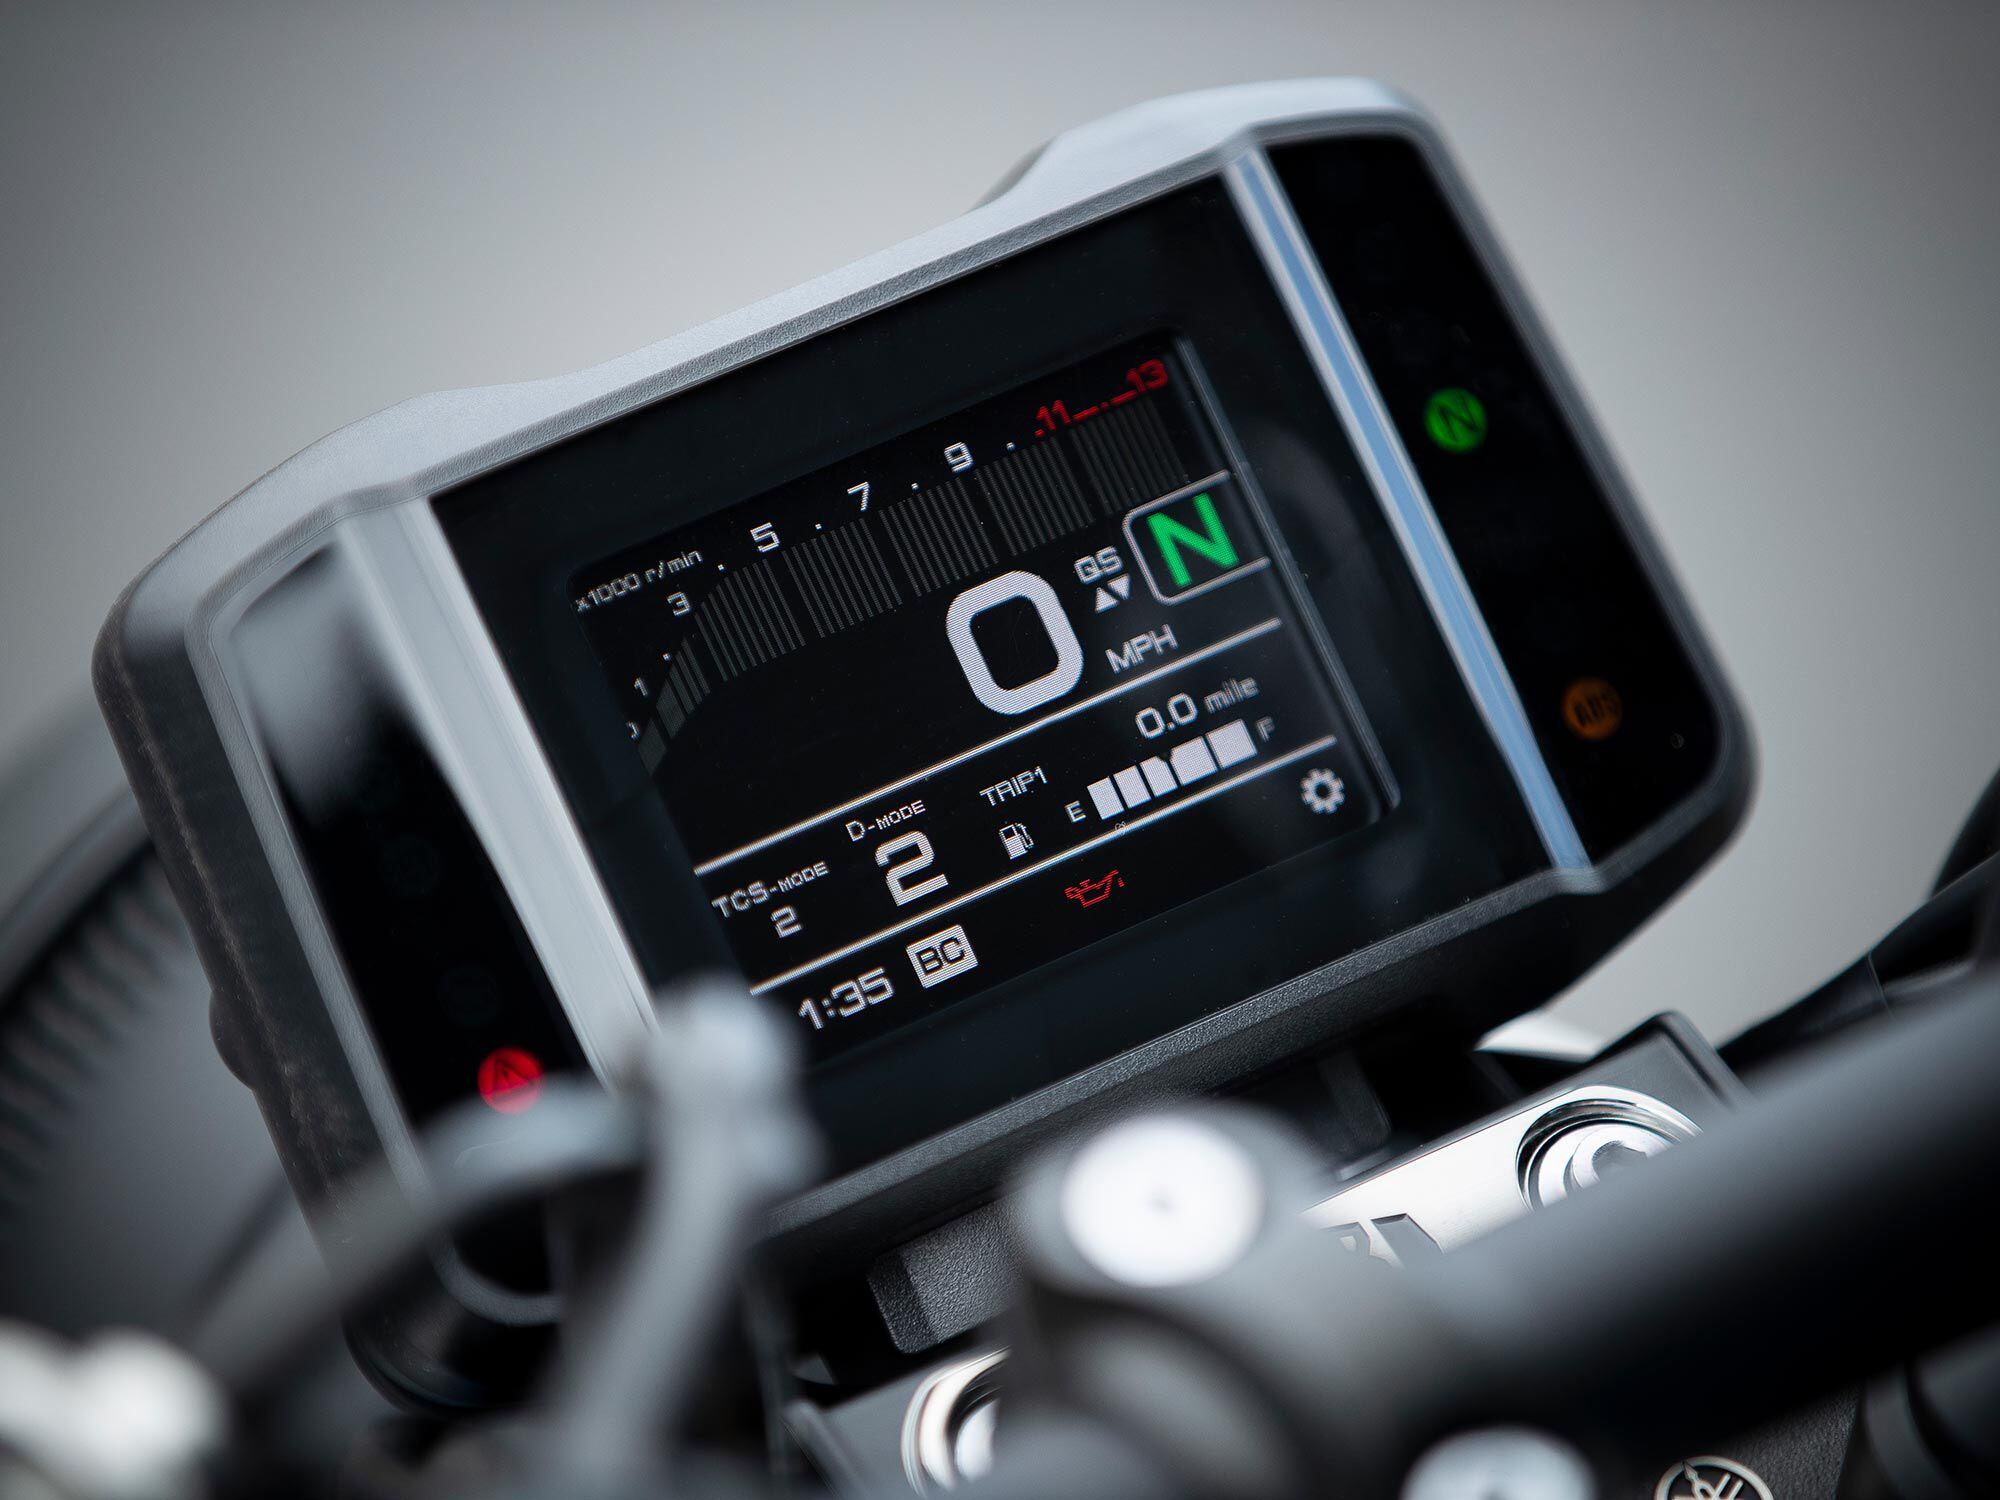 The XSR900’s full-color 3.5-inch TFT display is small but effective. Information is easy to read at a glance and you can easily toggle through settings using the handlebar switches.